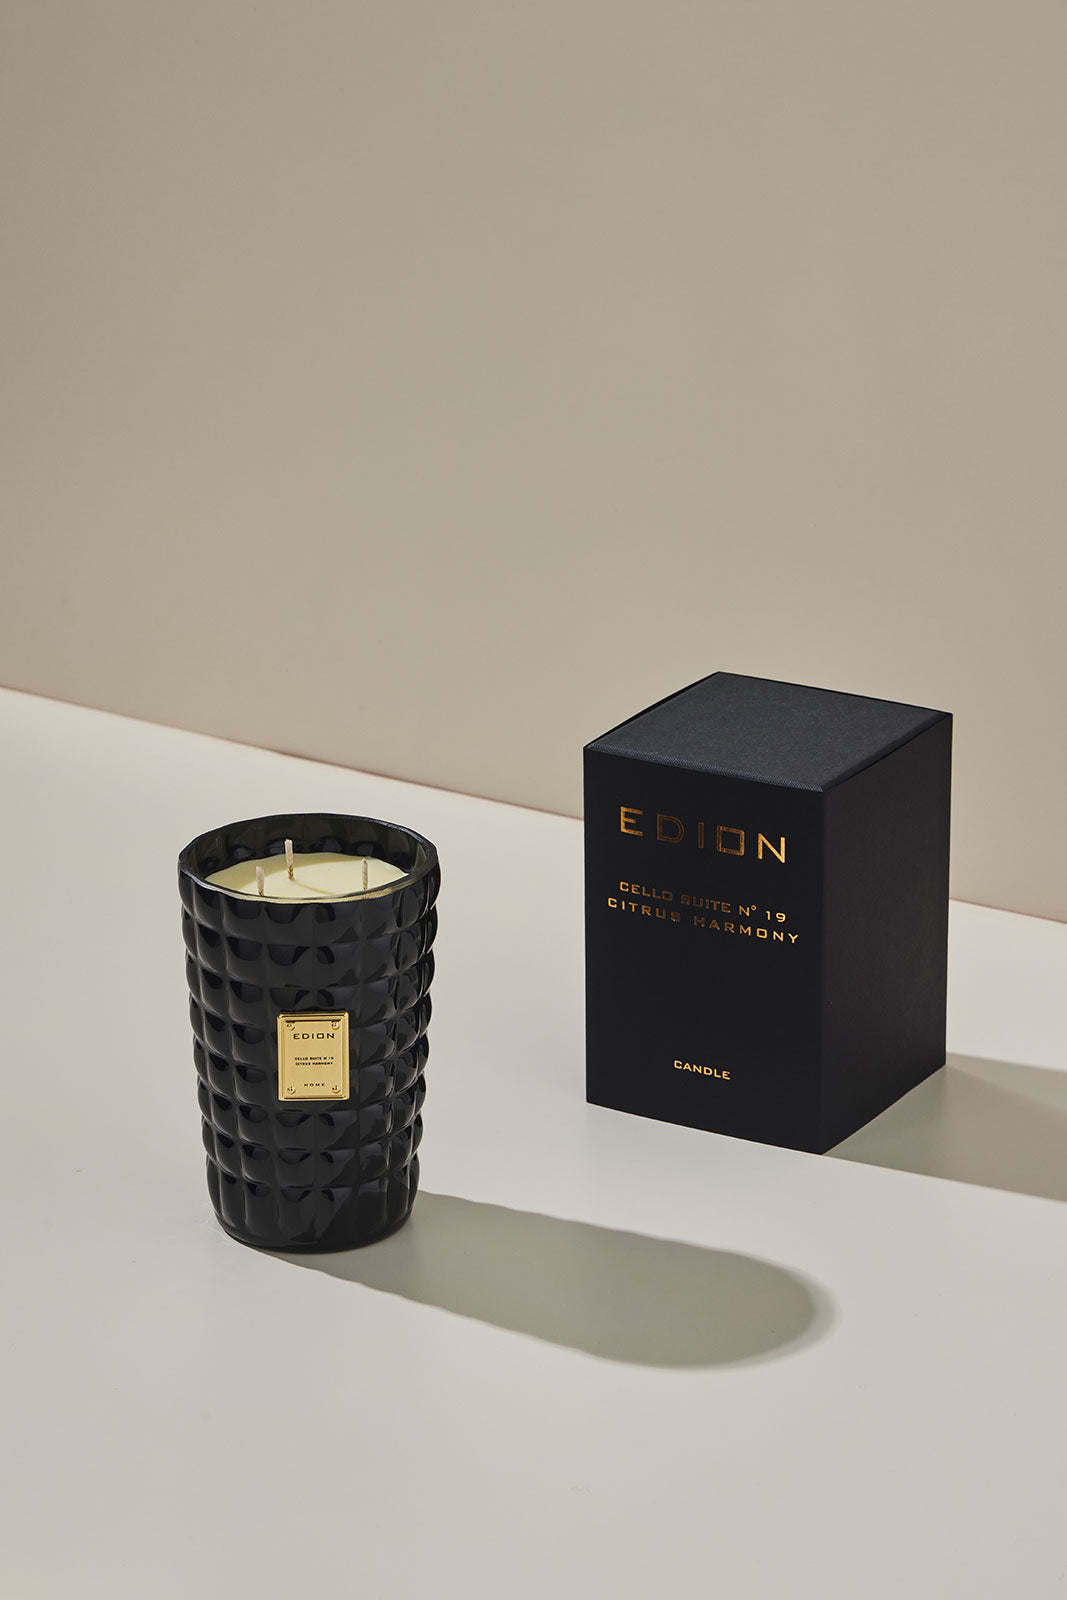 Luxury scented candle Cello suite n.19 Citrus harmony